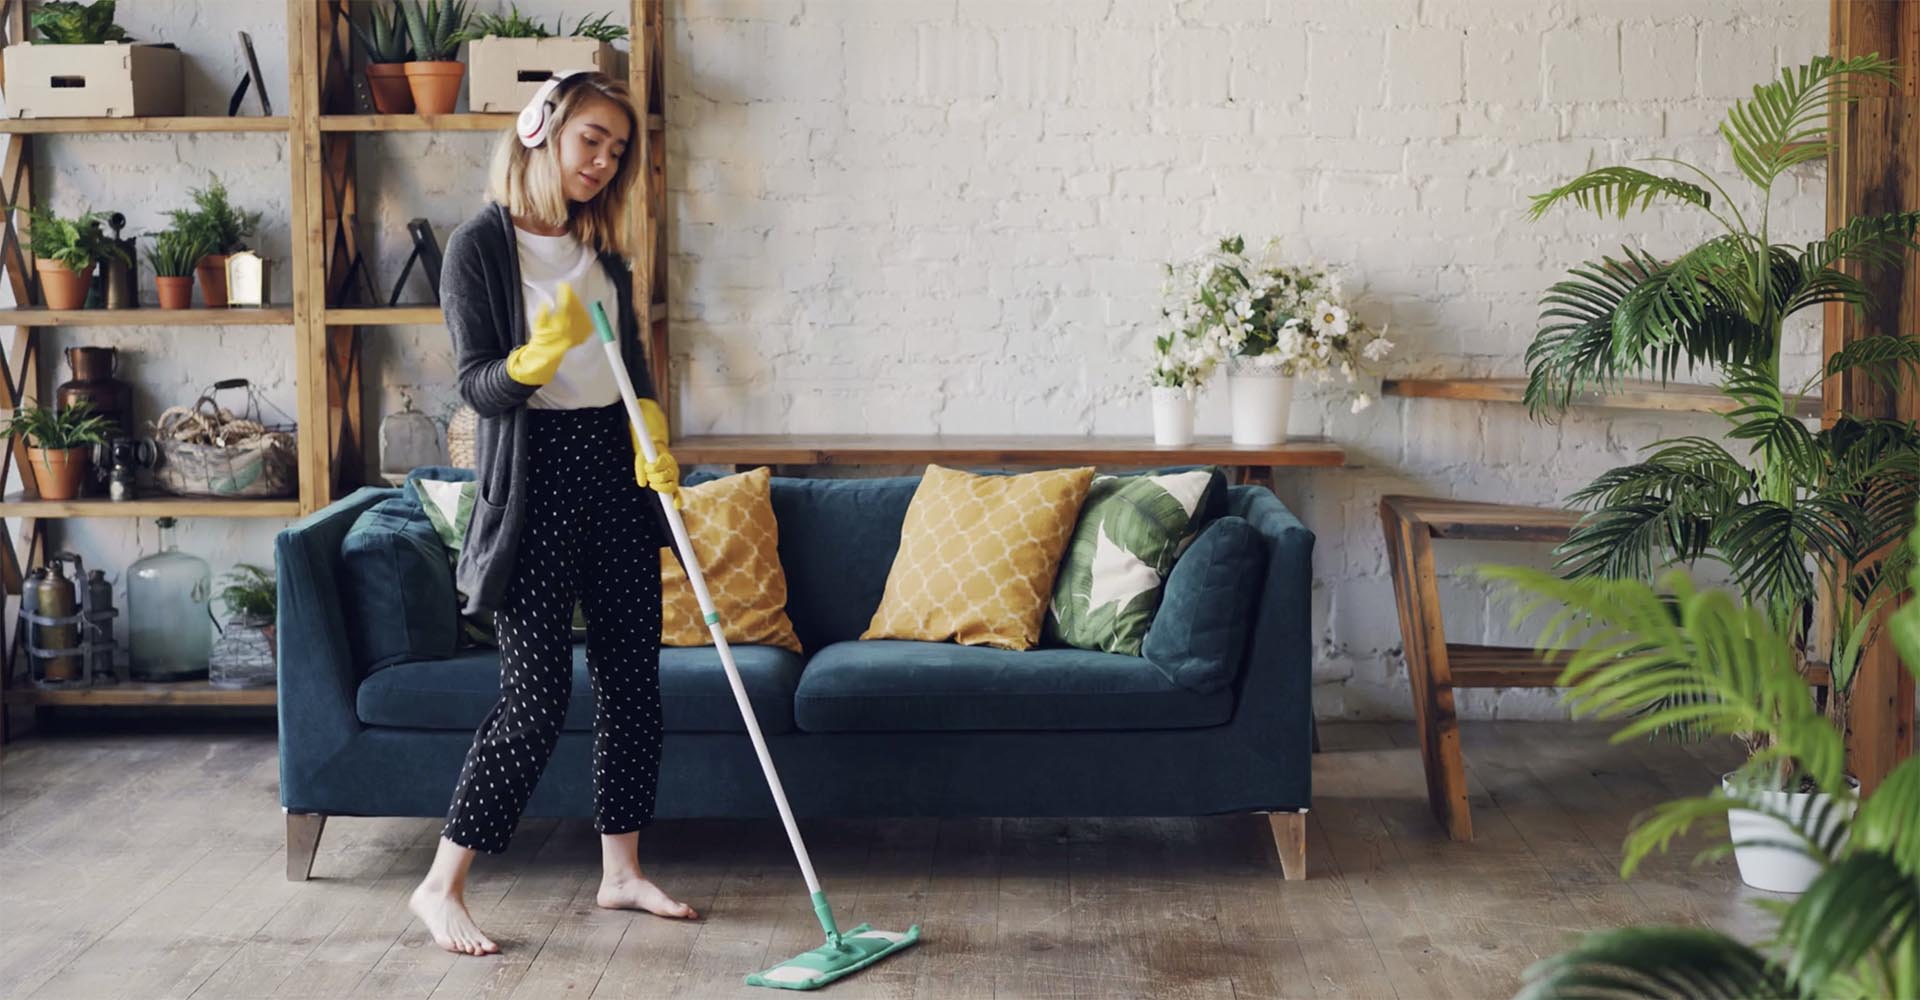 VIDEO: 6 steps for spring cleaning success